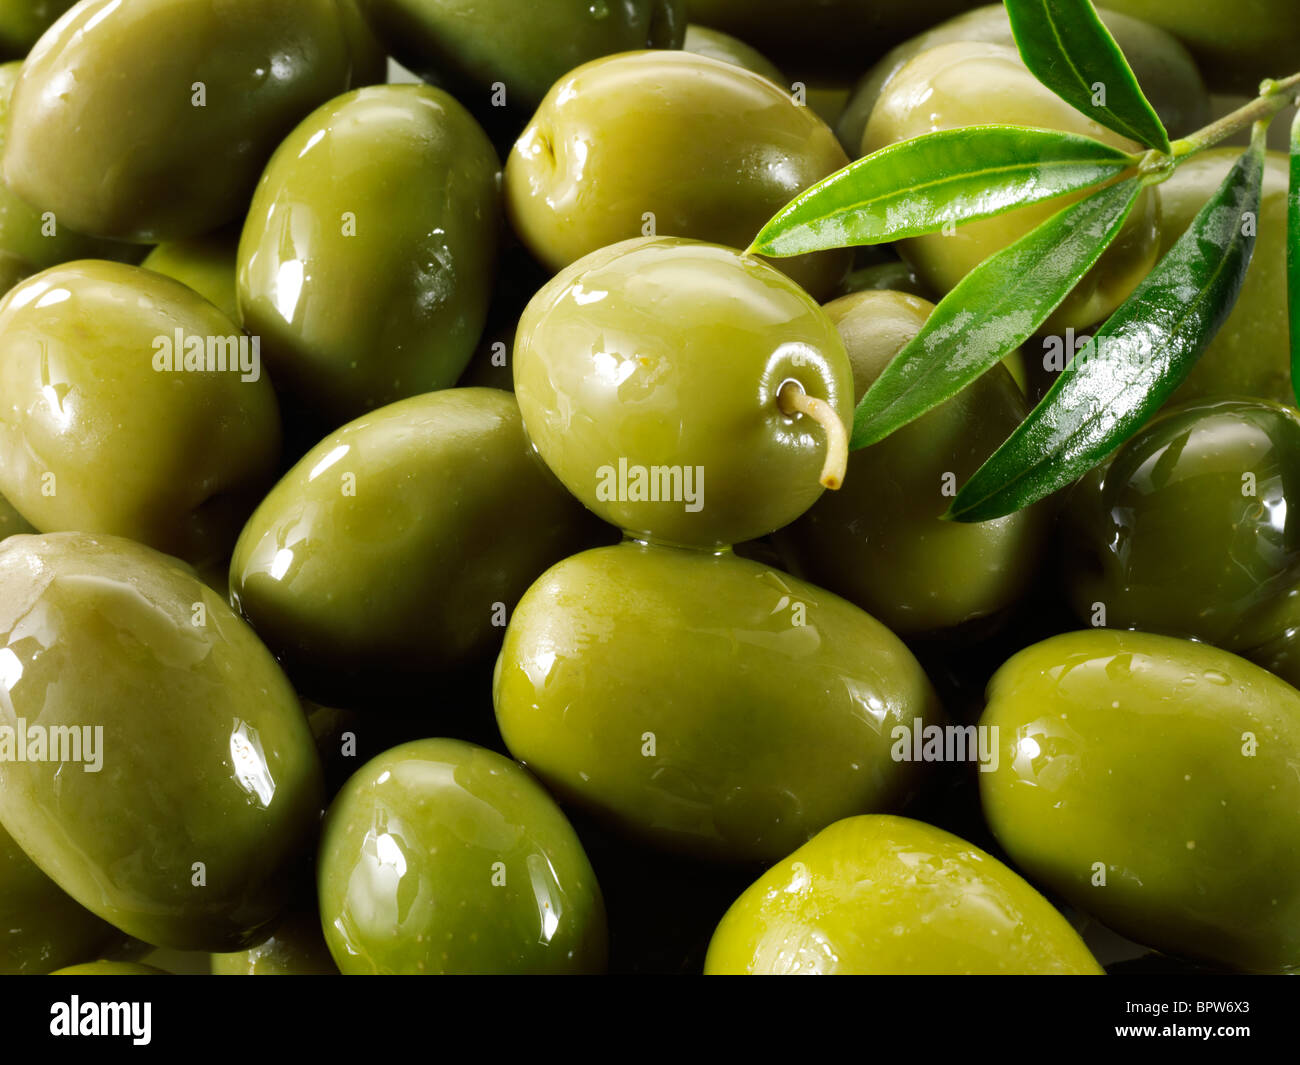 Fresh green olives queen photos, photos & images. Banque D'Images